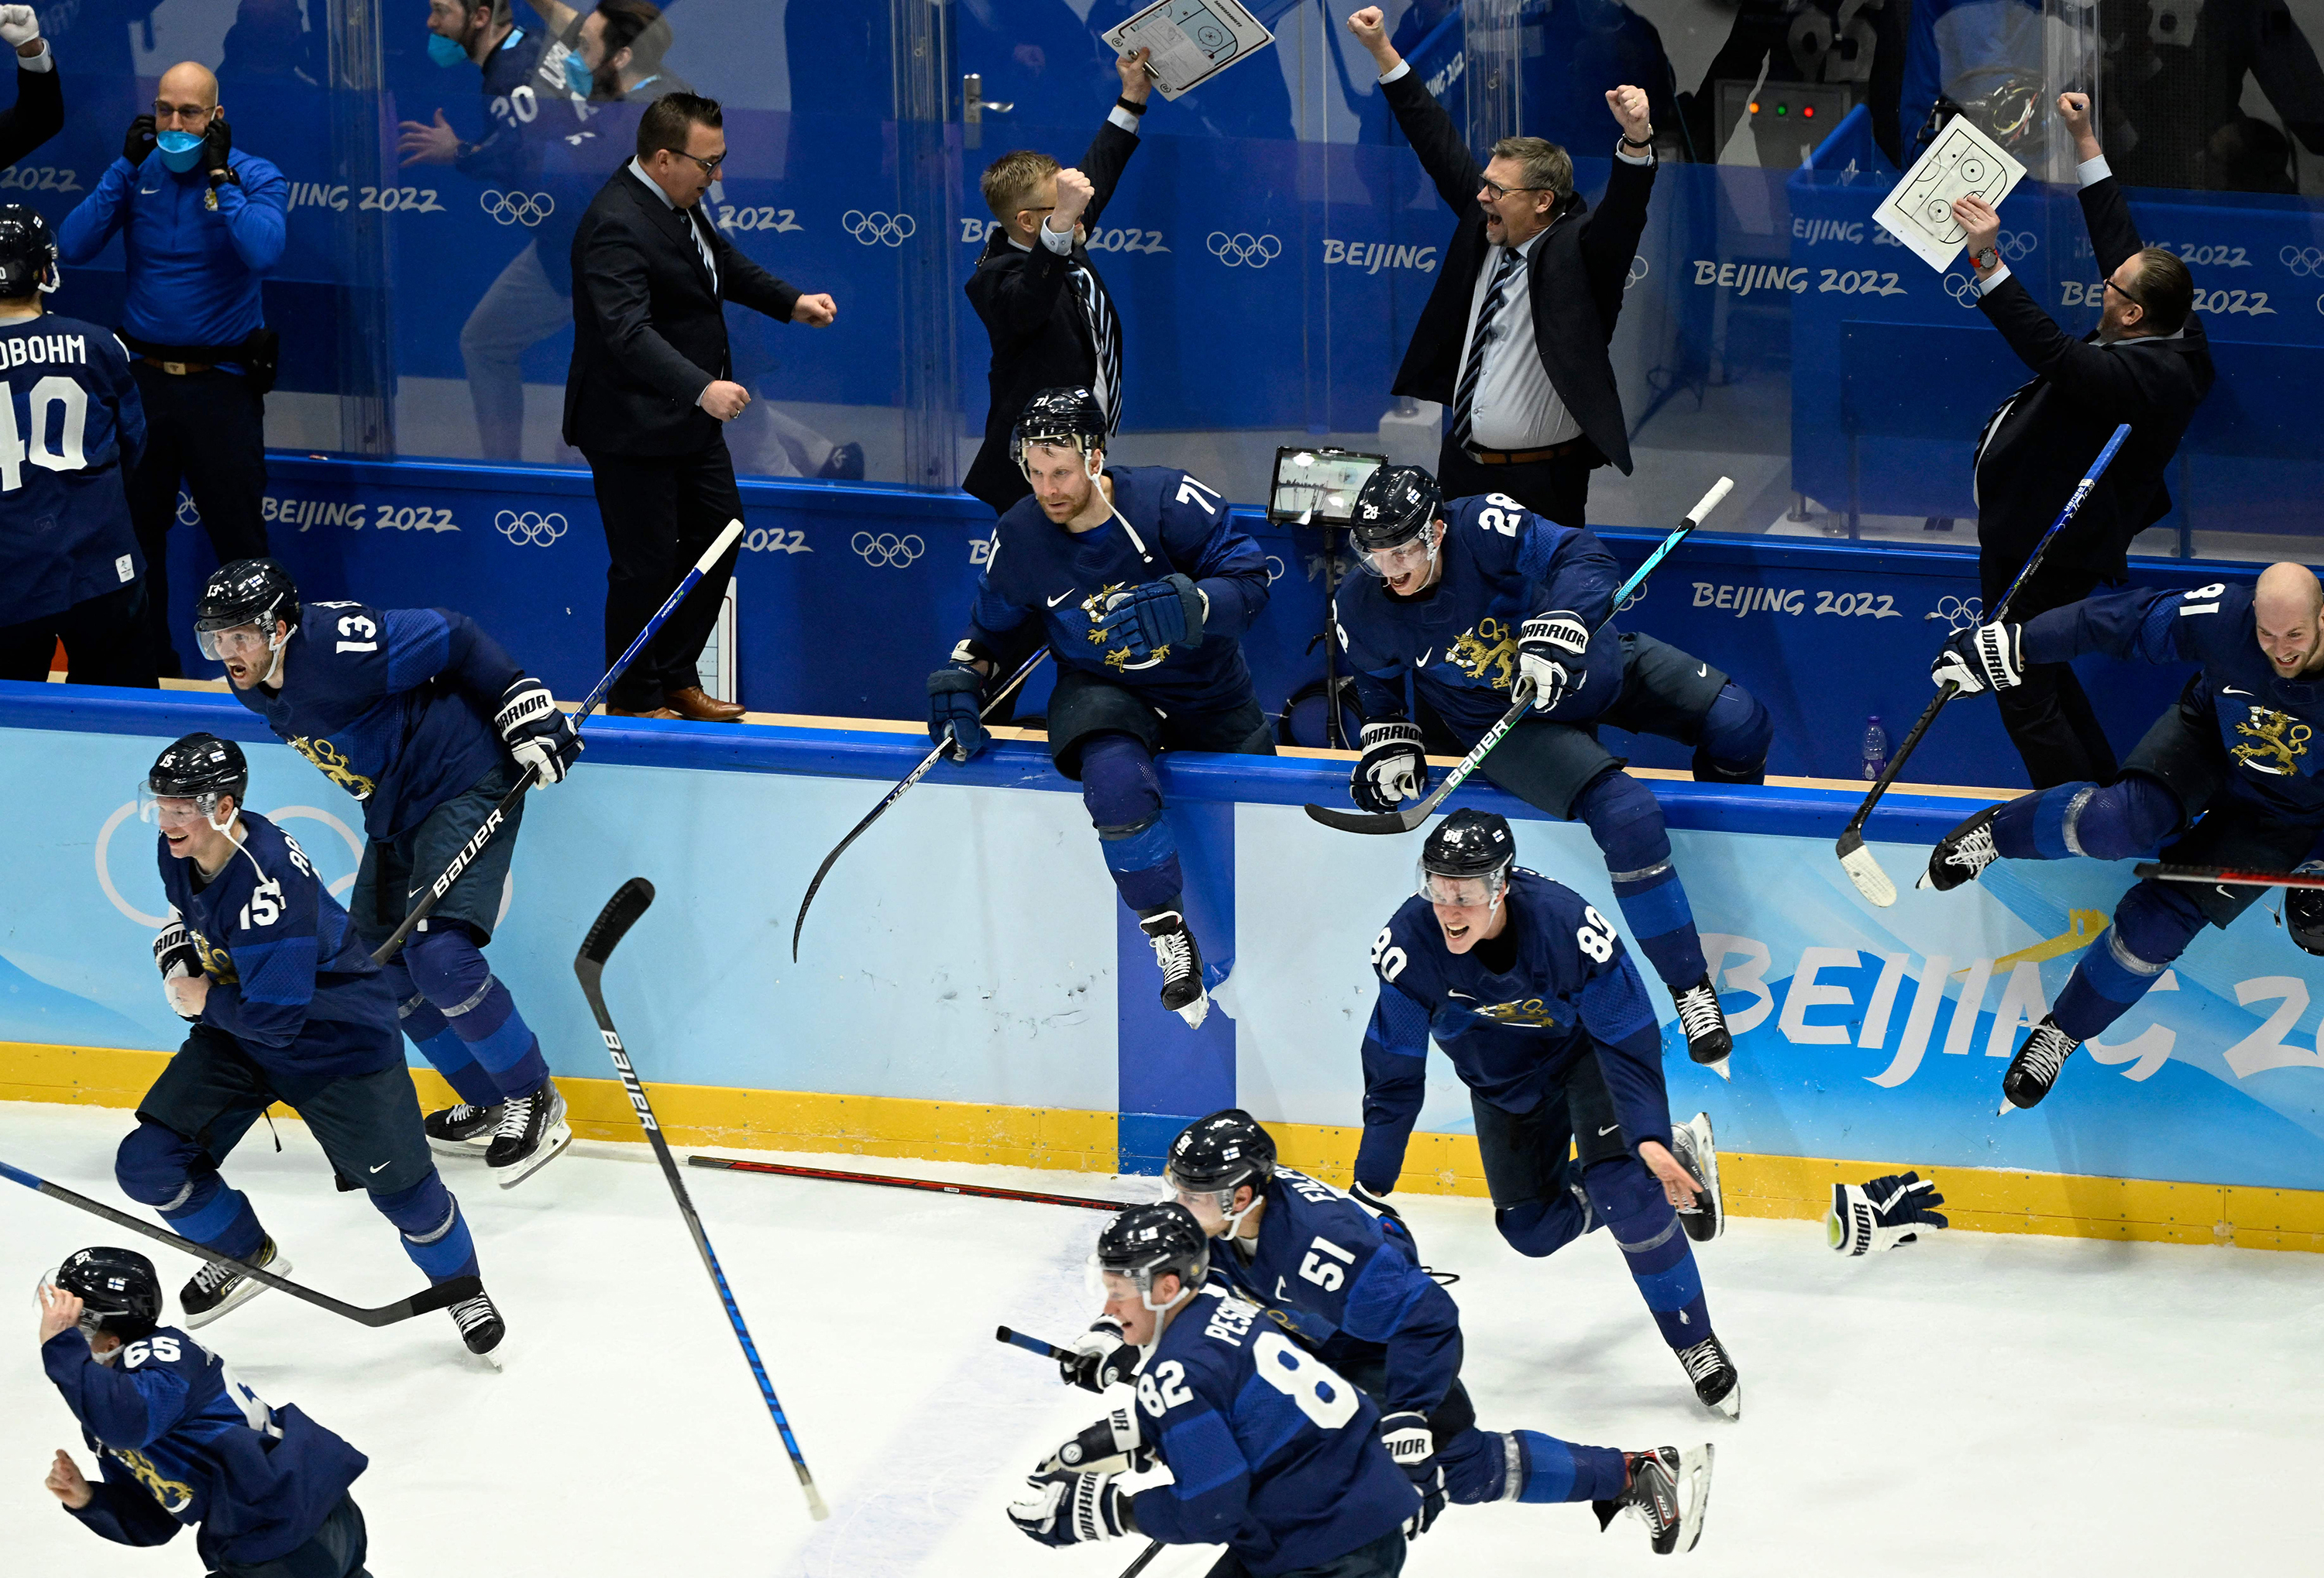 Team Finland defeats Team ROC to win gold in men's ice hockey final on Sunday.